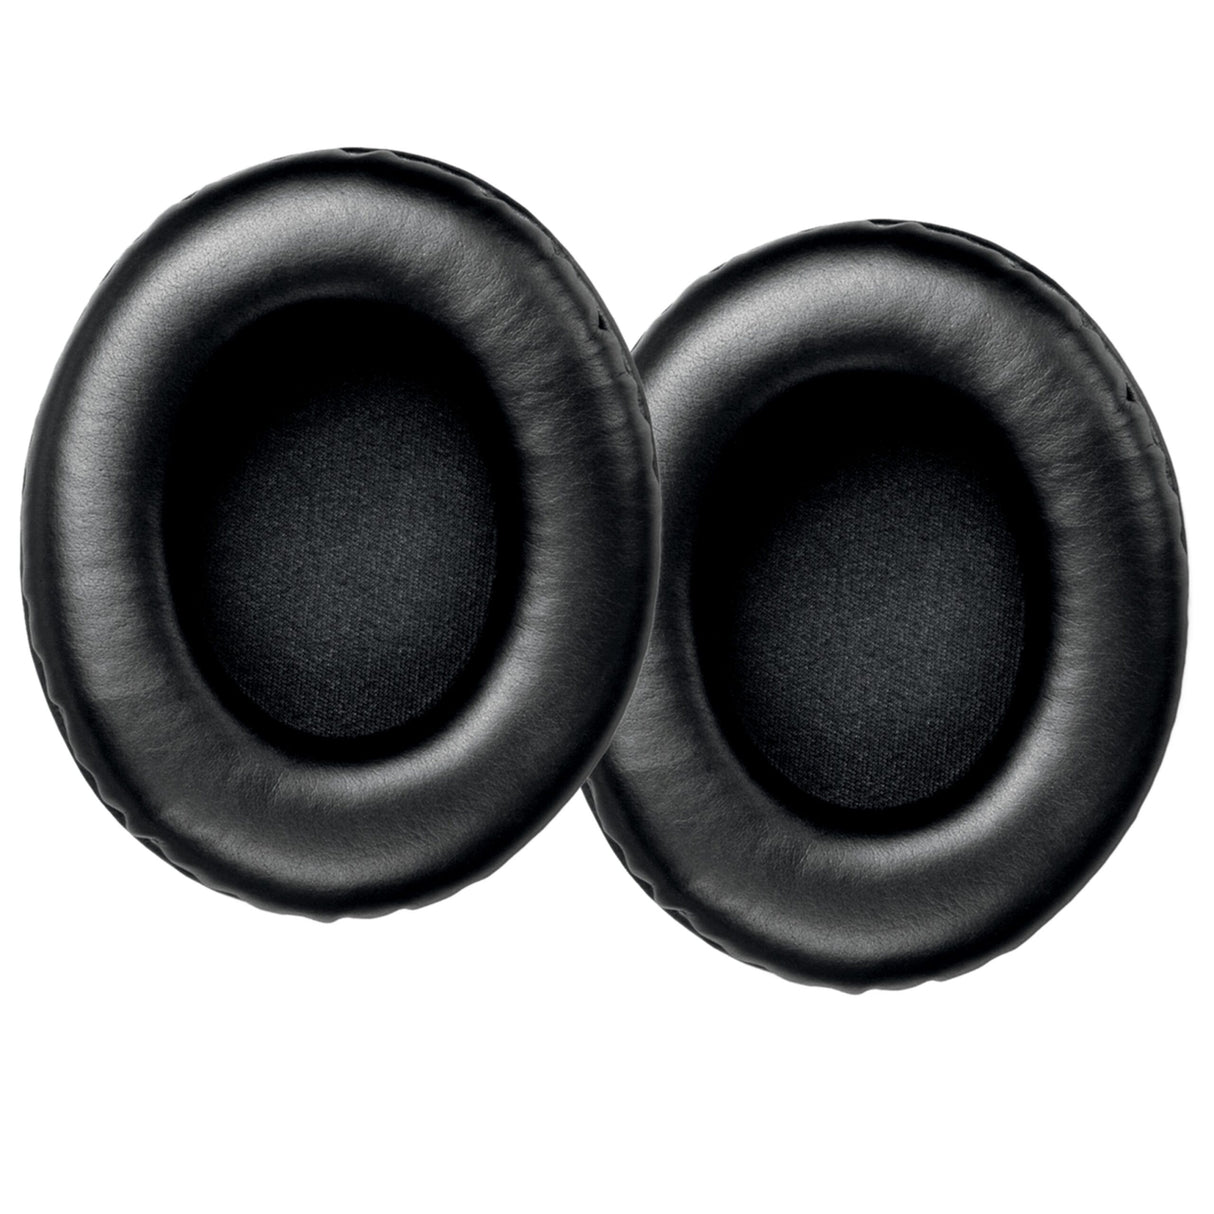 Shure BCAEC440 Replacement Ear Pads for BRH440M and BRH441M, Pair